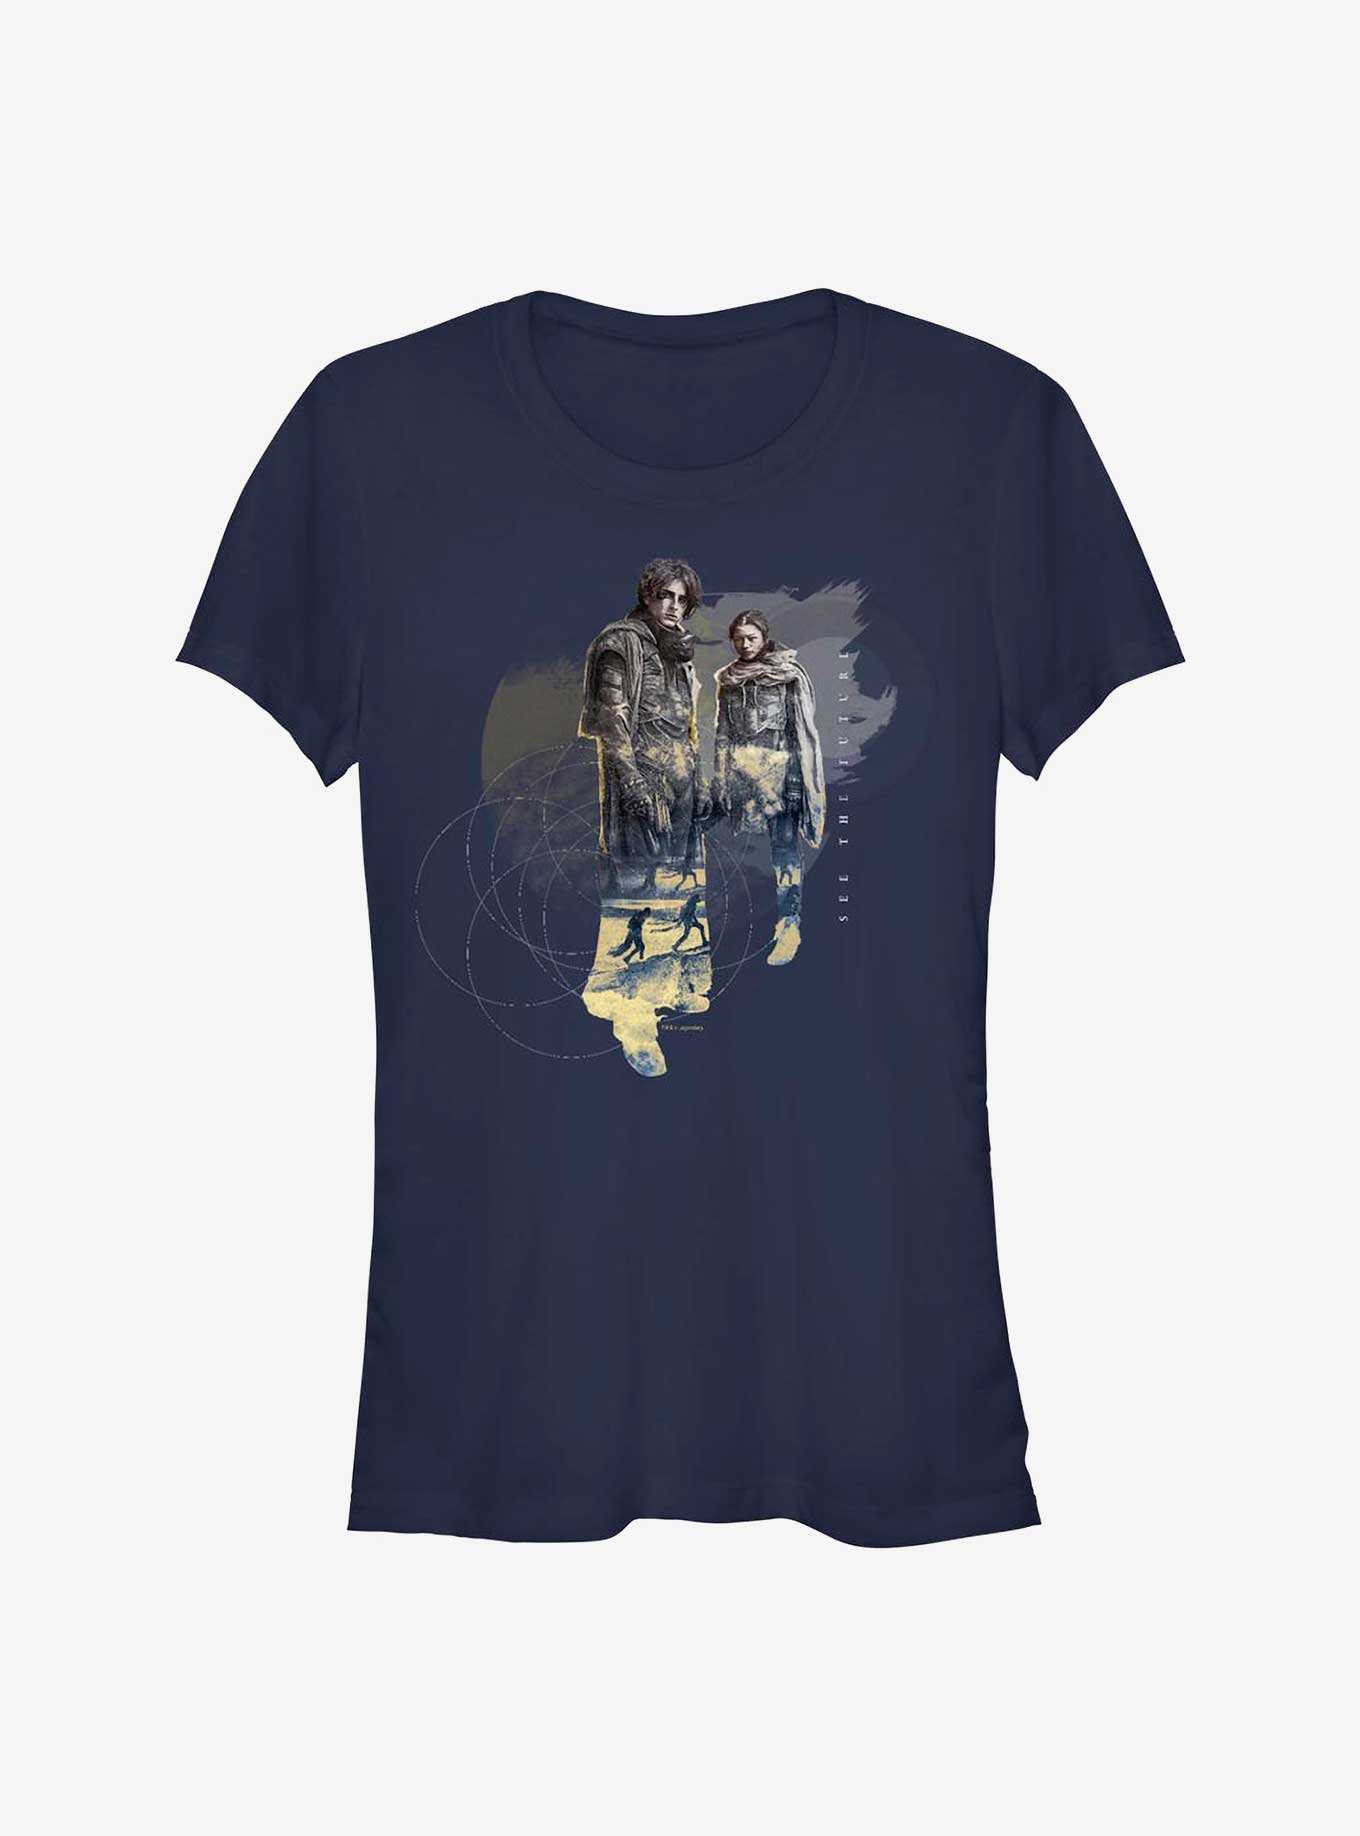 Dune See The Future Girls T-Shirt, , hi-res